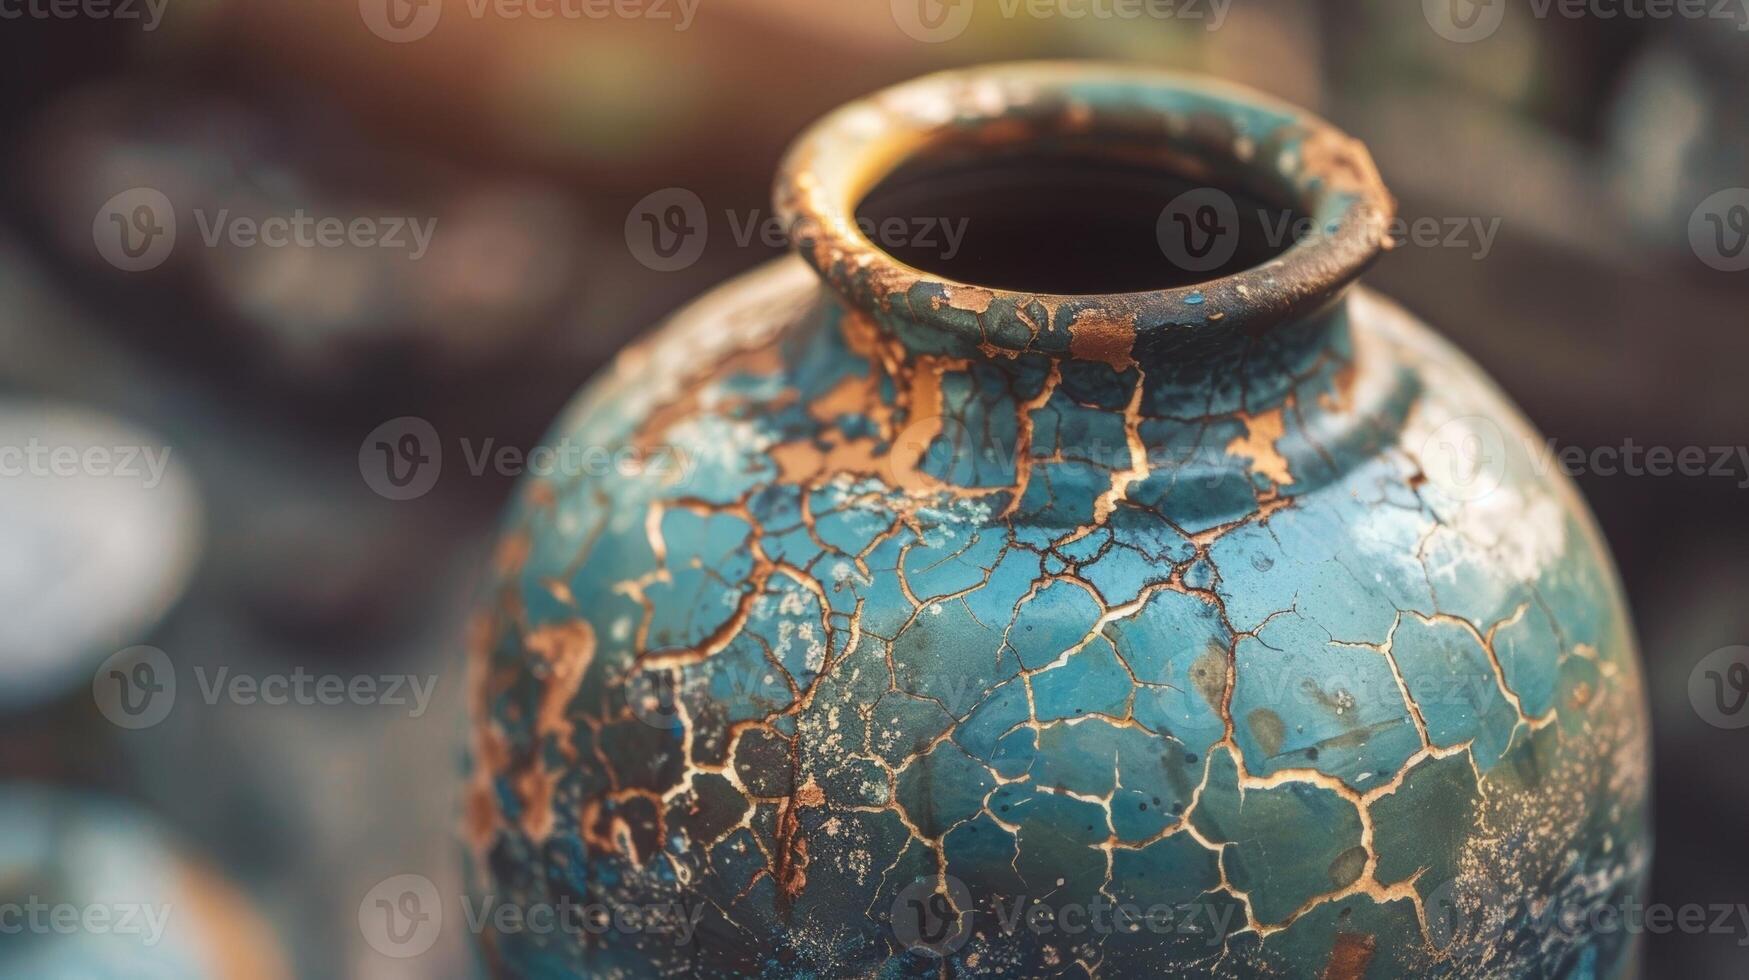 A completed DIY repair job on a ceramic vase with perfectly blended clay covering the previous cracks and chips. photo